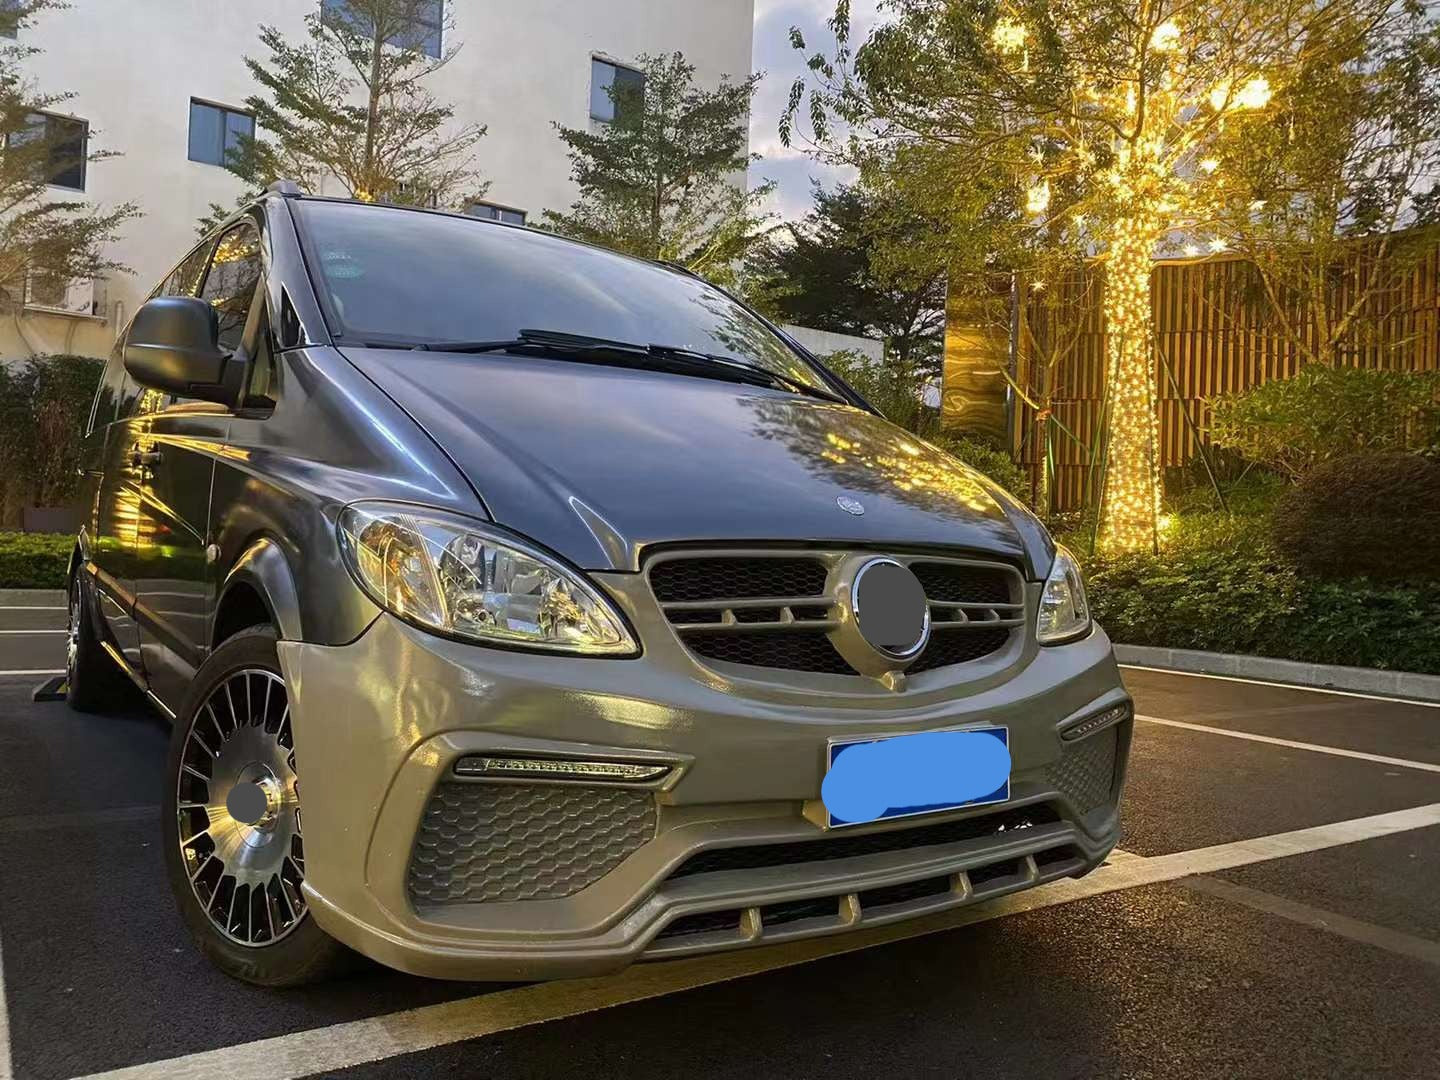 Piecha body kit for the Mercedes 447 Vito and the V-Class!